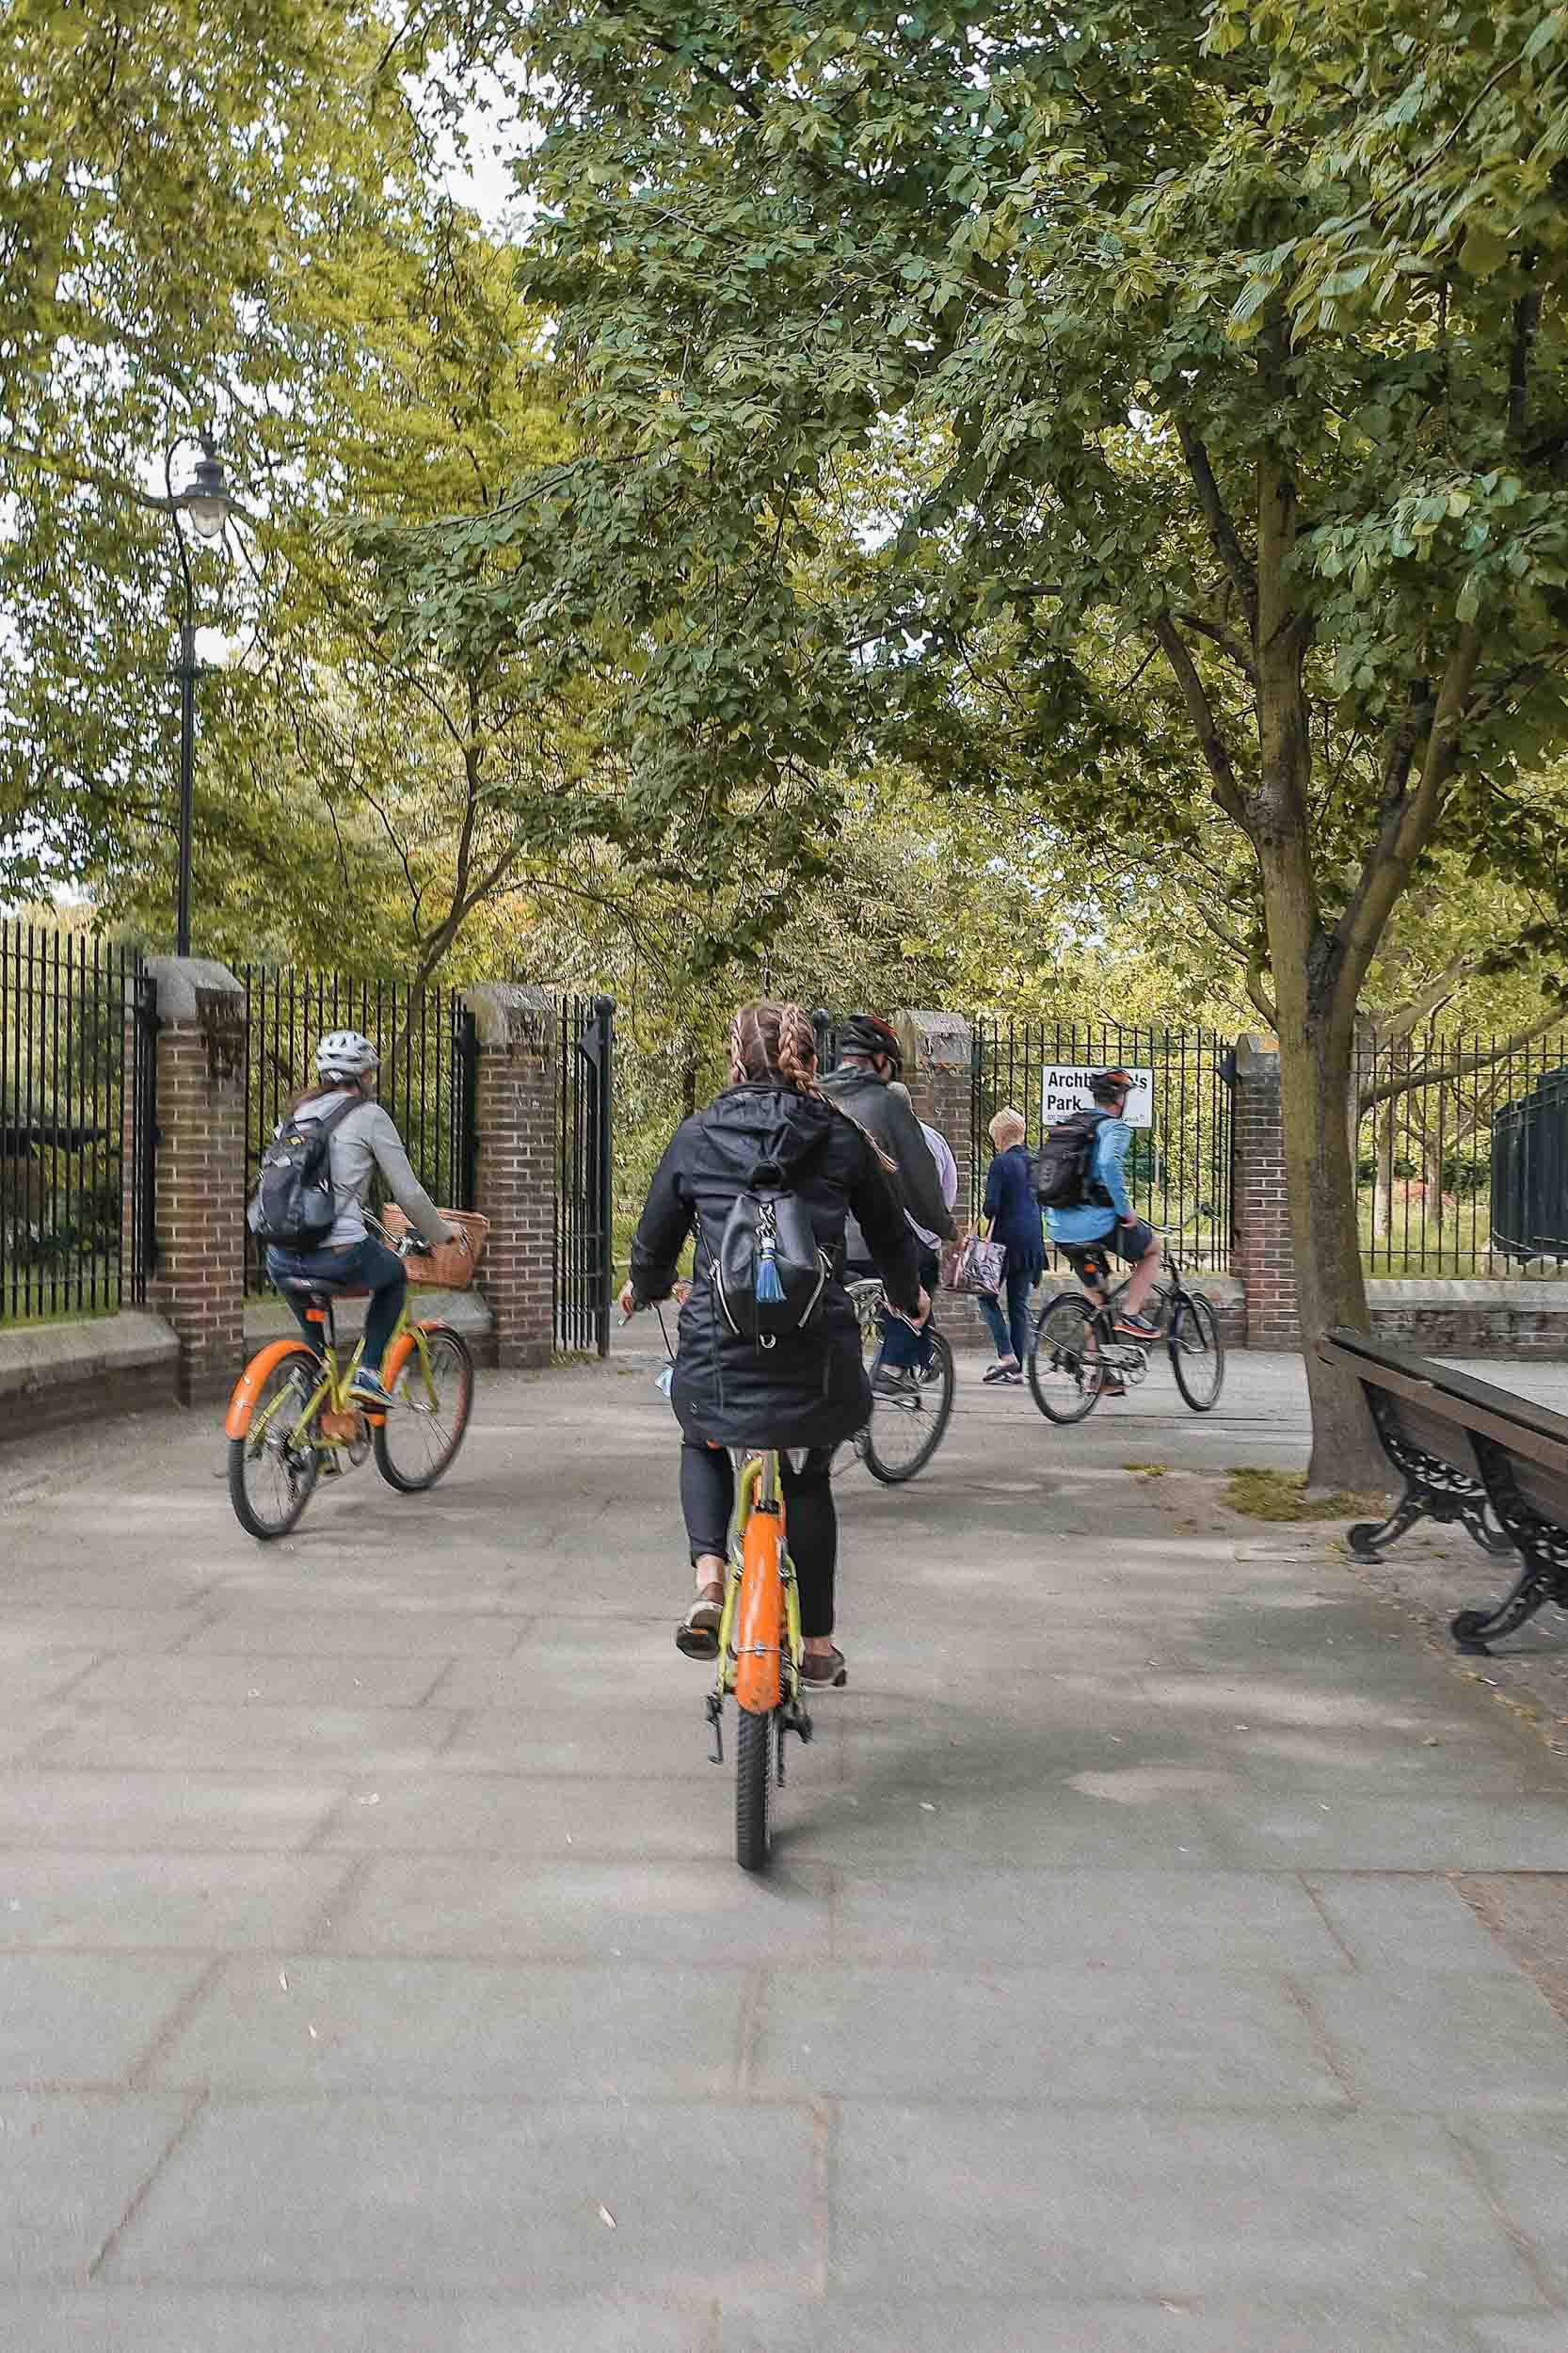 A can't miss London itinerary item: a London sightseeing tour. I recommend doing this by bike.